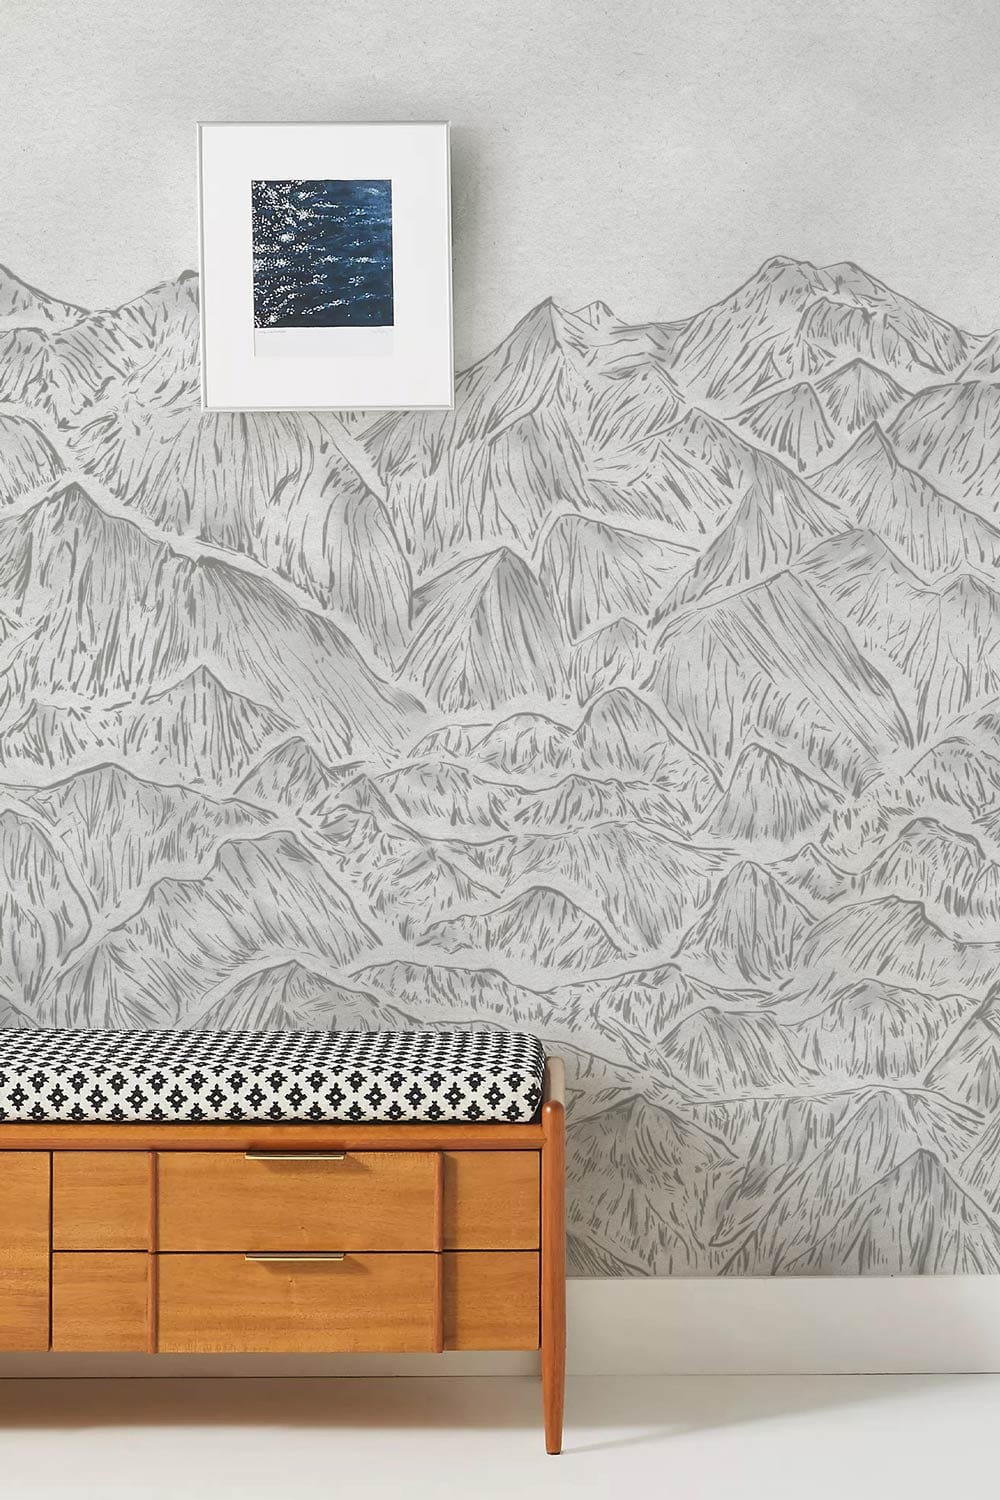 design of mountains peaks sketched on a wall painting for the corridor